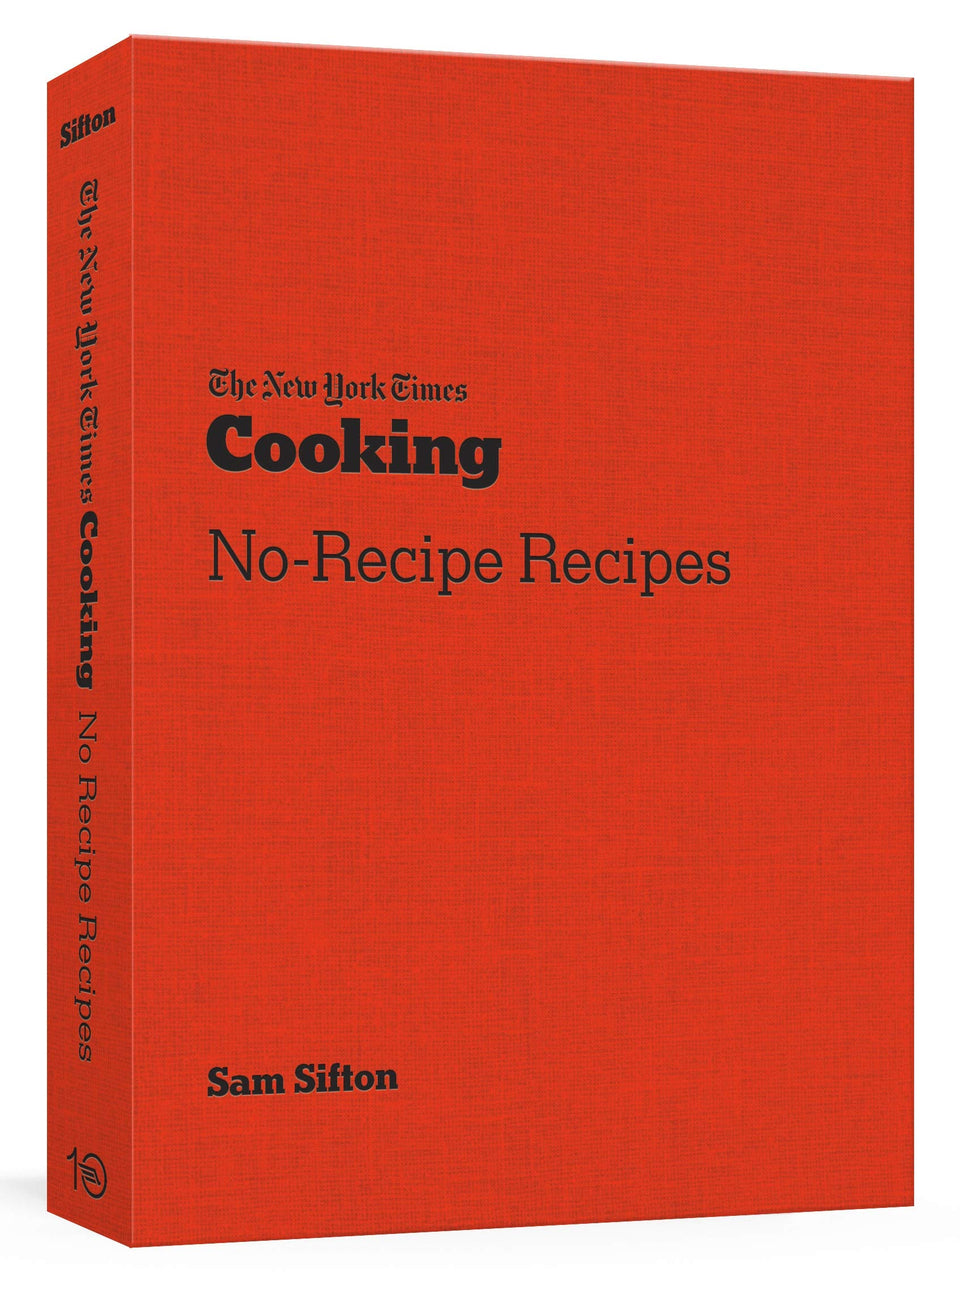 The New York Times Cooking No-Recipe Recipes: Sam Sifton